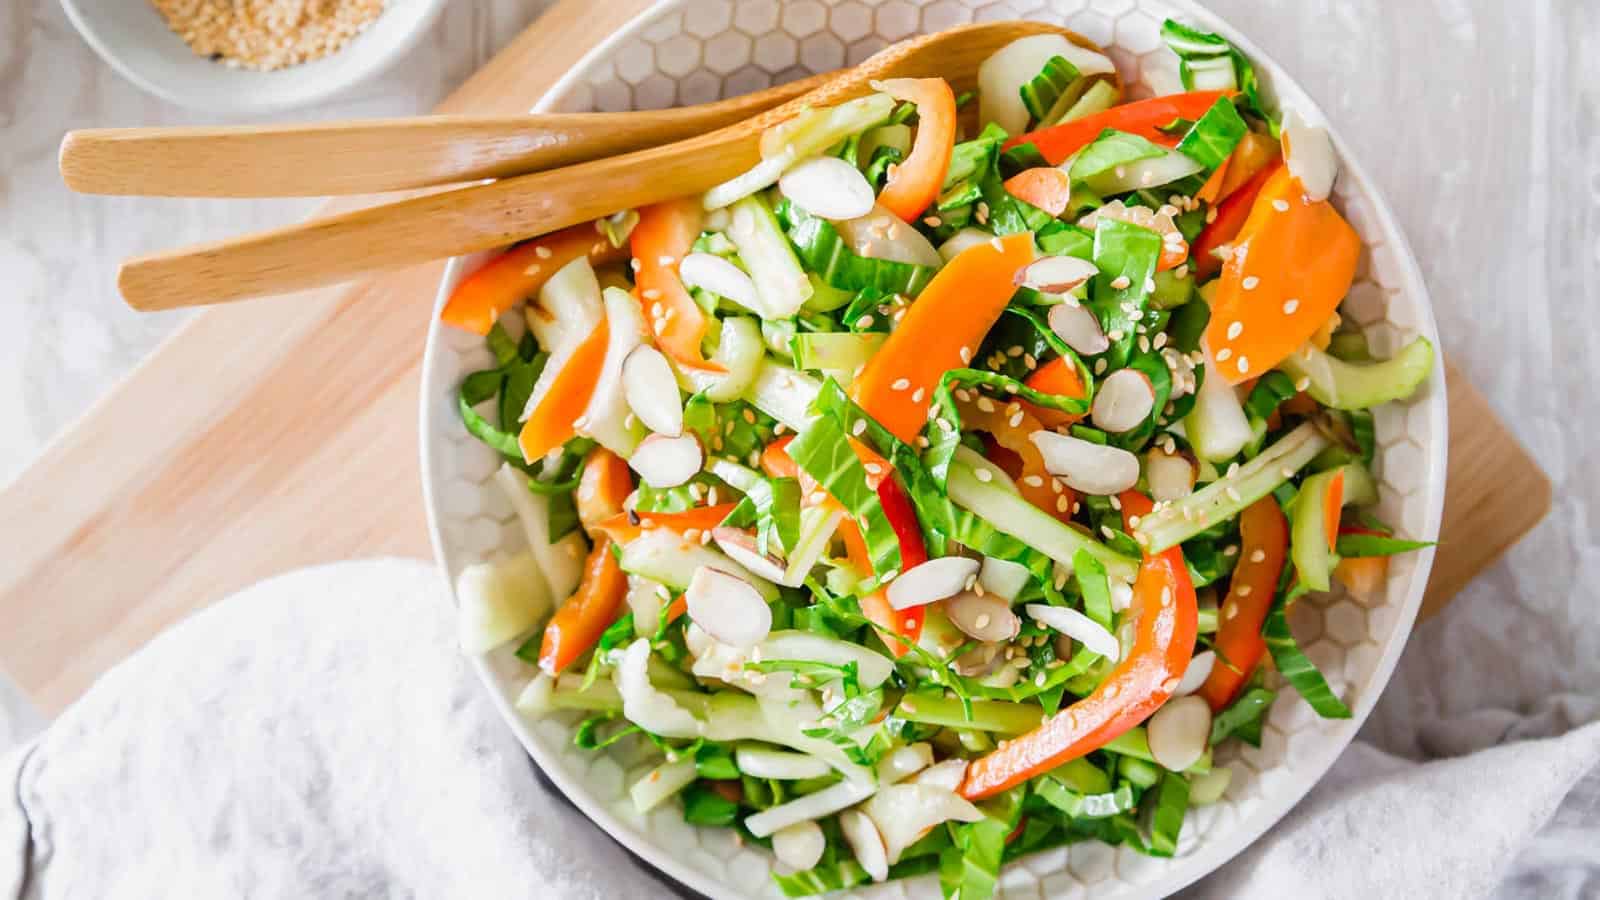 Bok choy salad with sesame dressing in a bowl with wooden serving utensils.